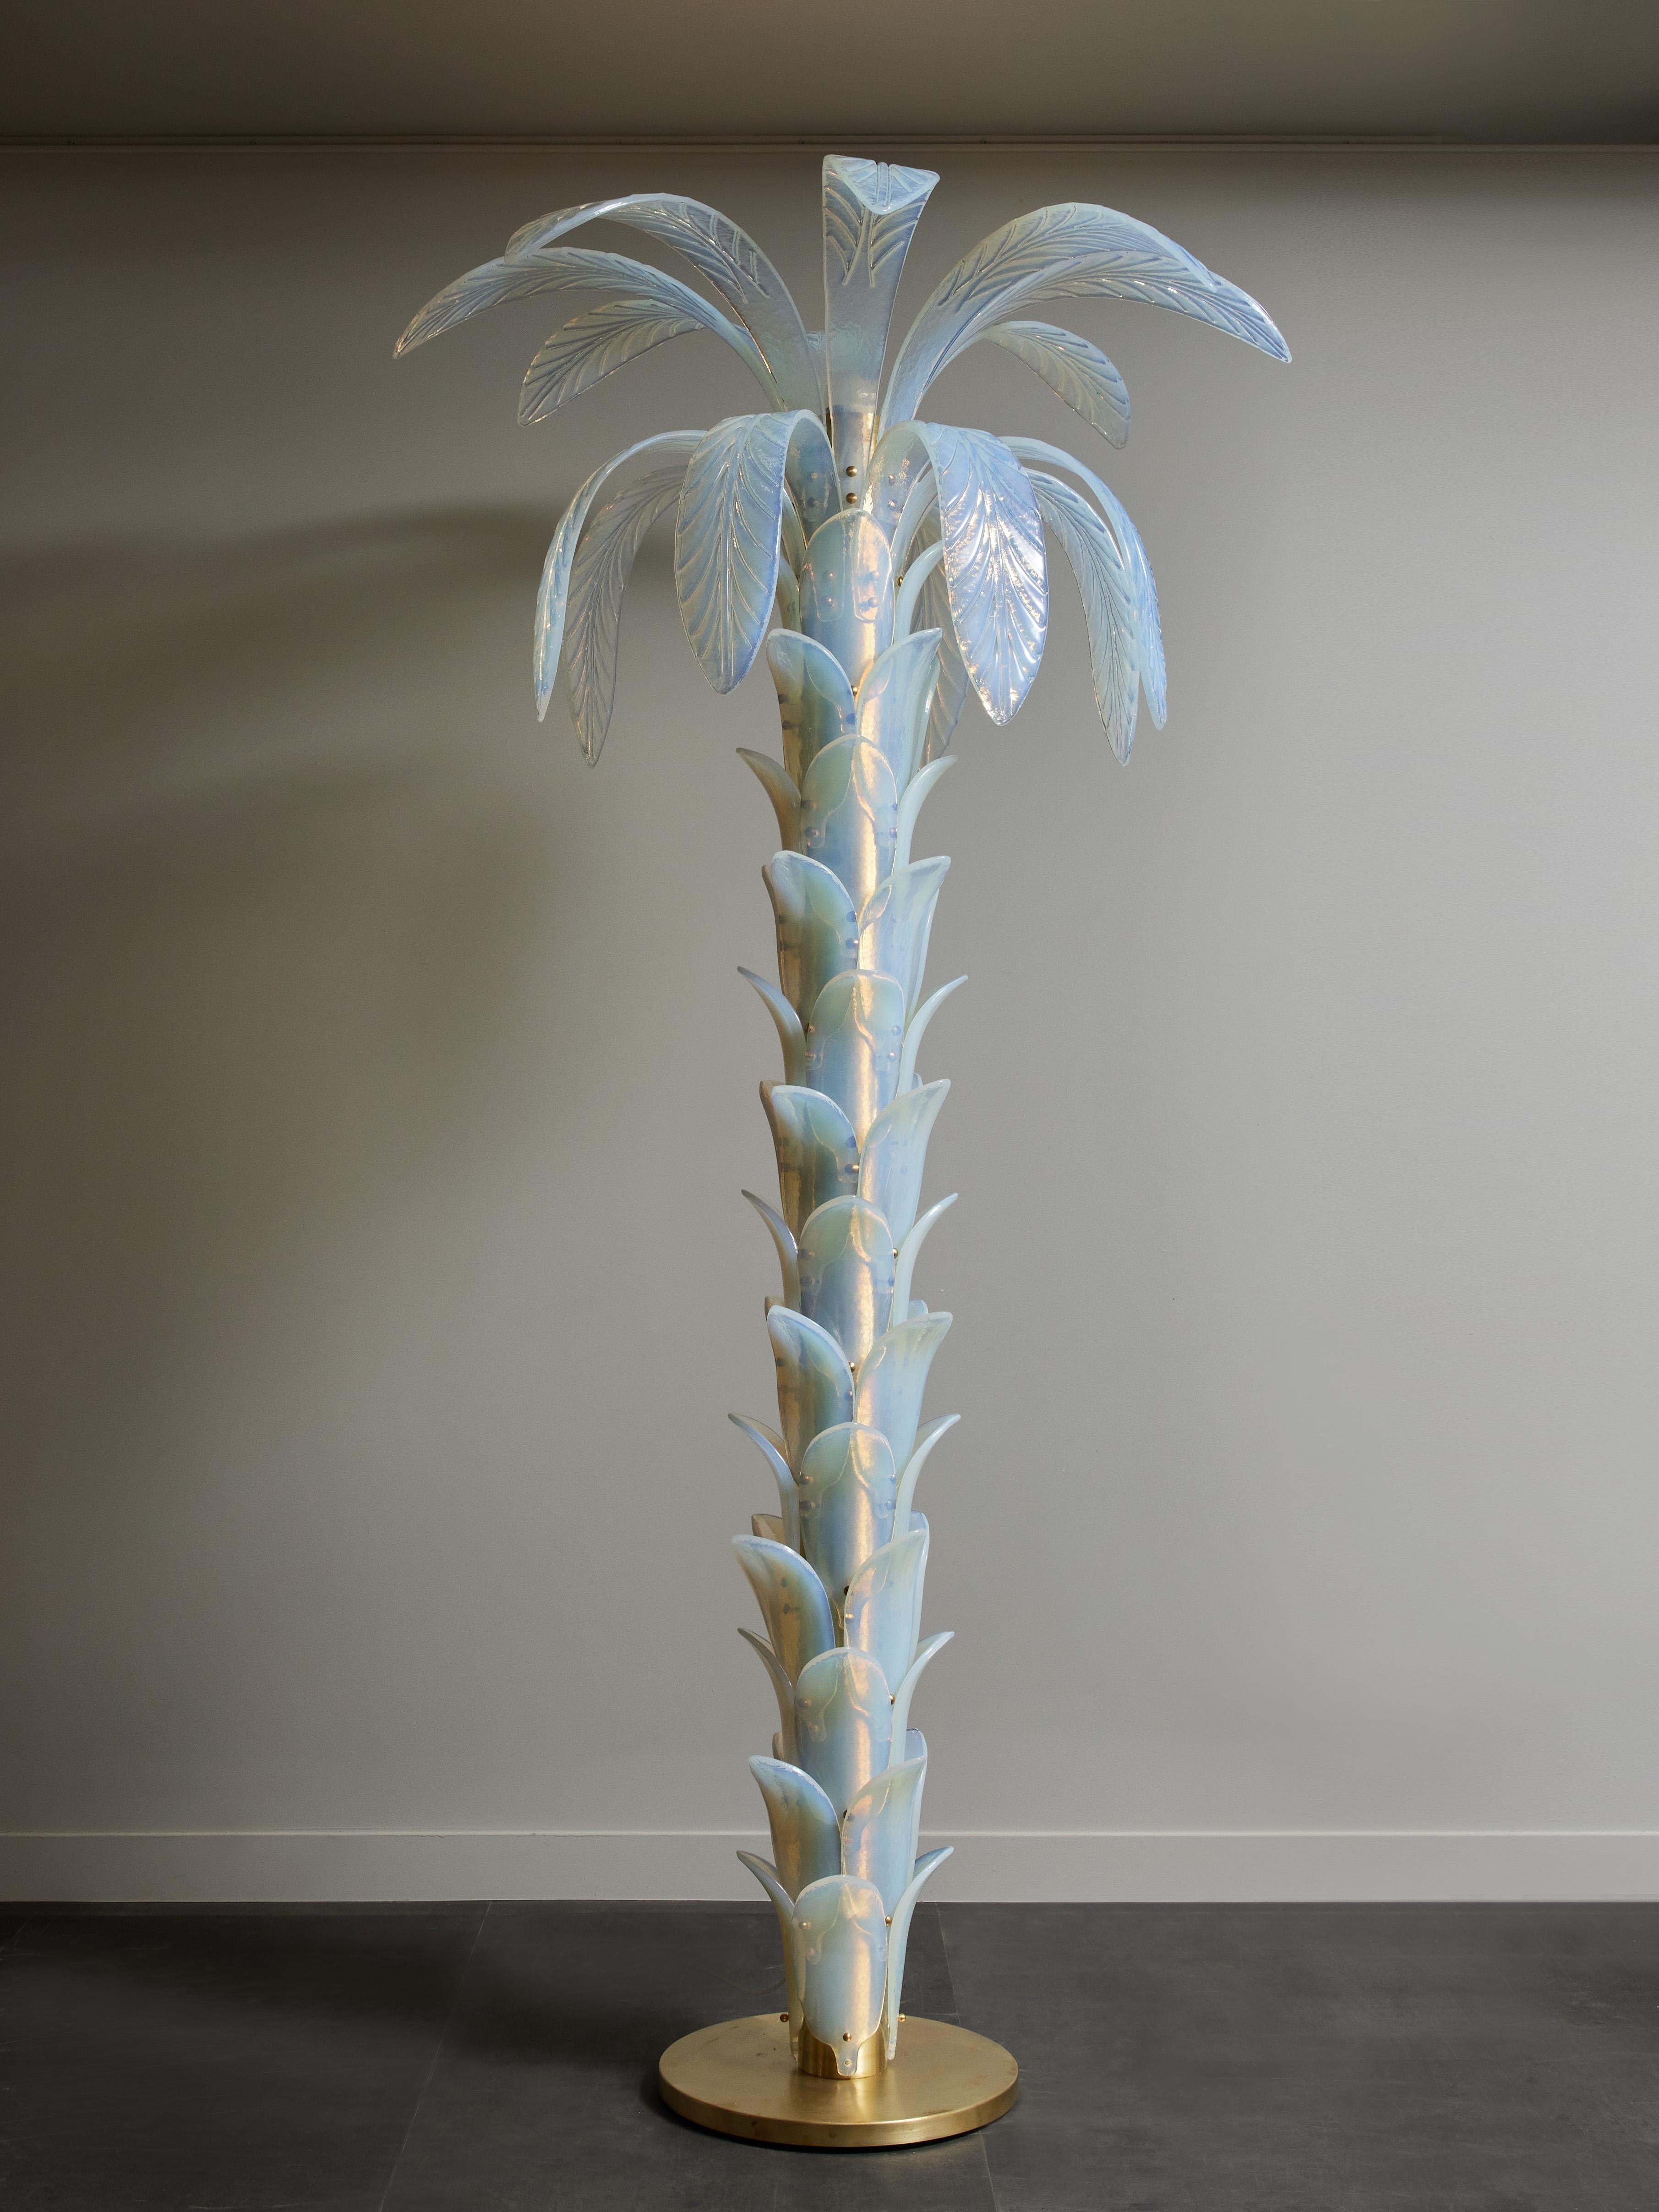 Tall floor lamp shaped like a palm tree, made of a brass circular base and trunk, covered with iridescent Murano glass leaves up to the top where large leaves burst out of the trunk.
One source of light at the top.
 